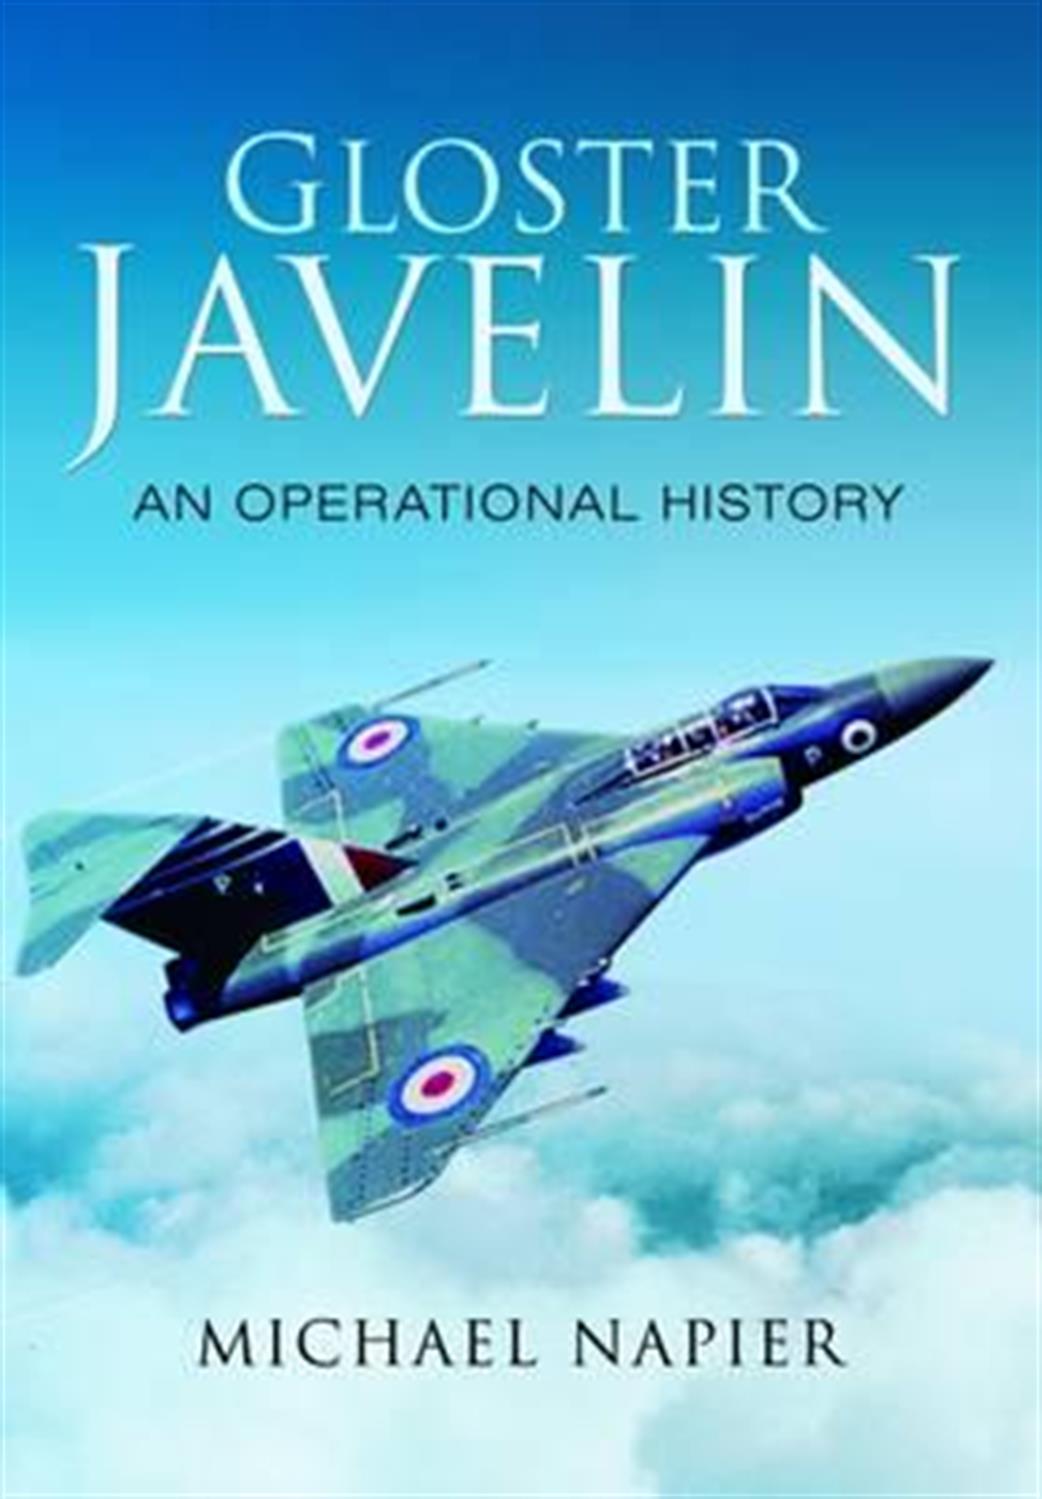 Pen & Sword  9781473848818 Gloster Javelin An Operational History by Michael Napier